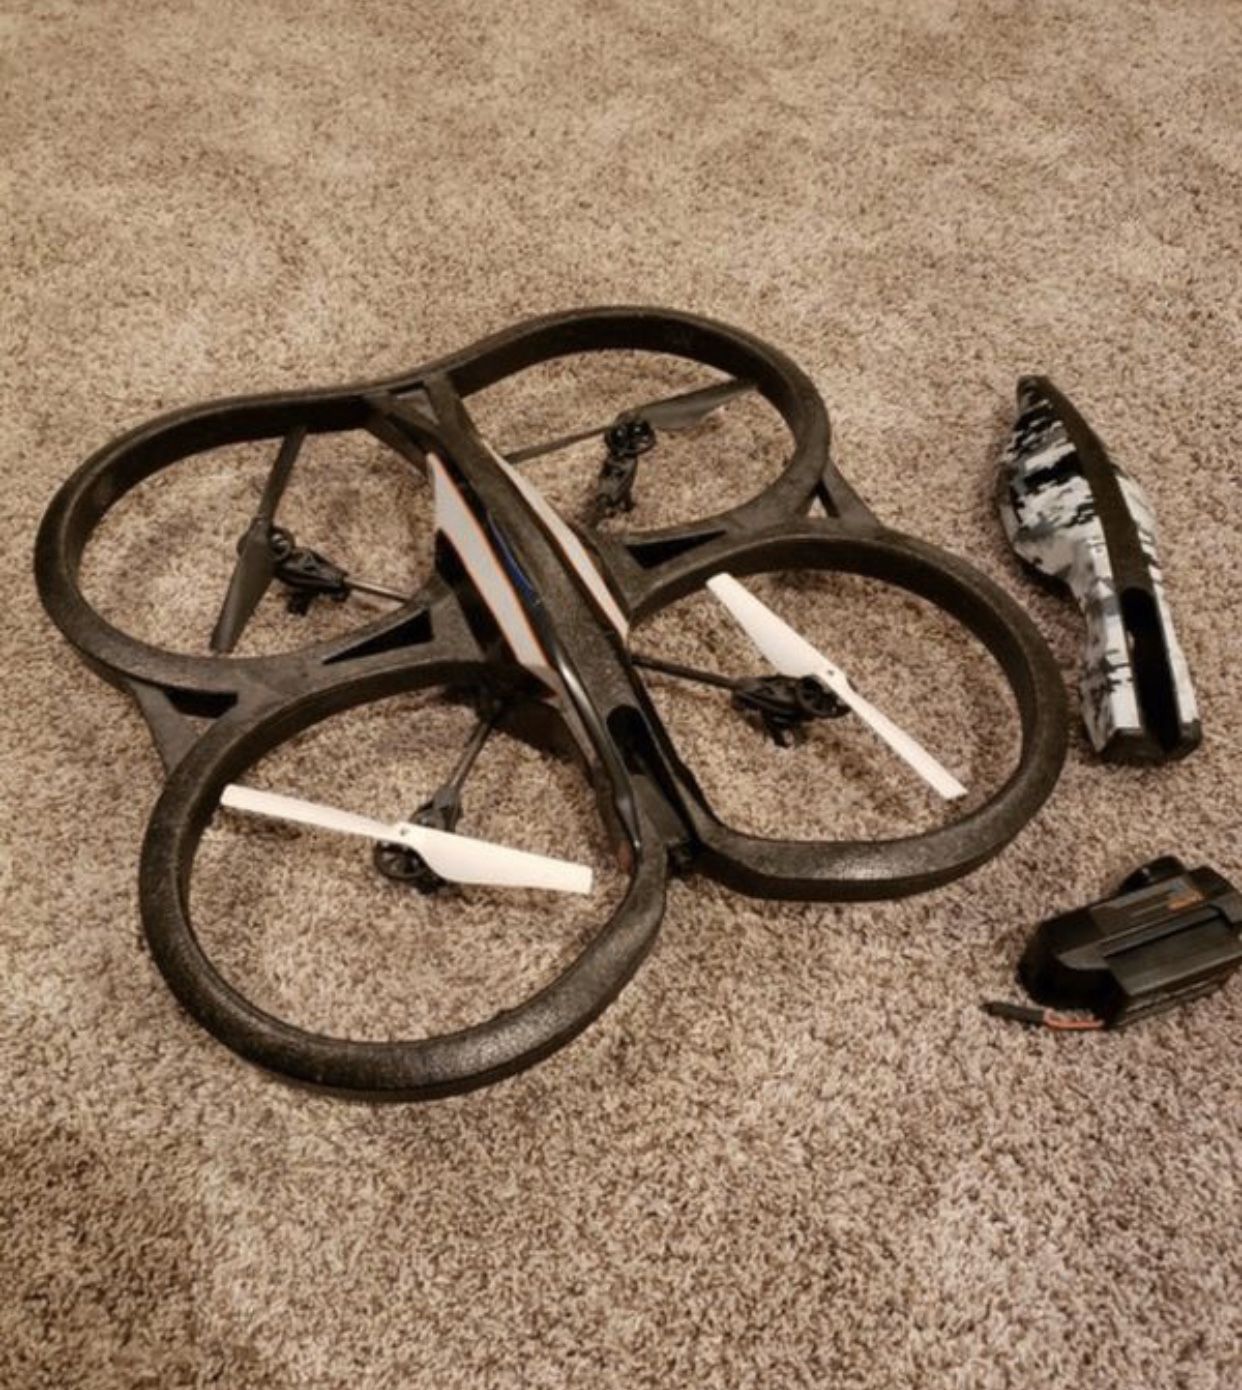 Parrot Drone 2.0 +extra cover & charger (needs new battery).